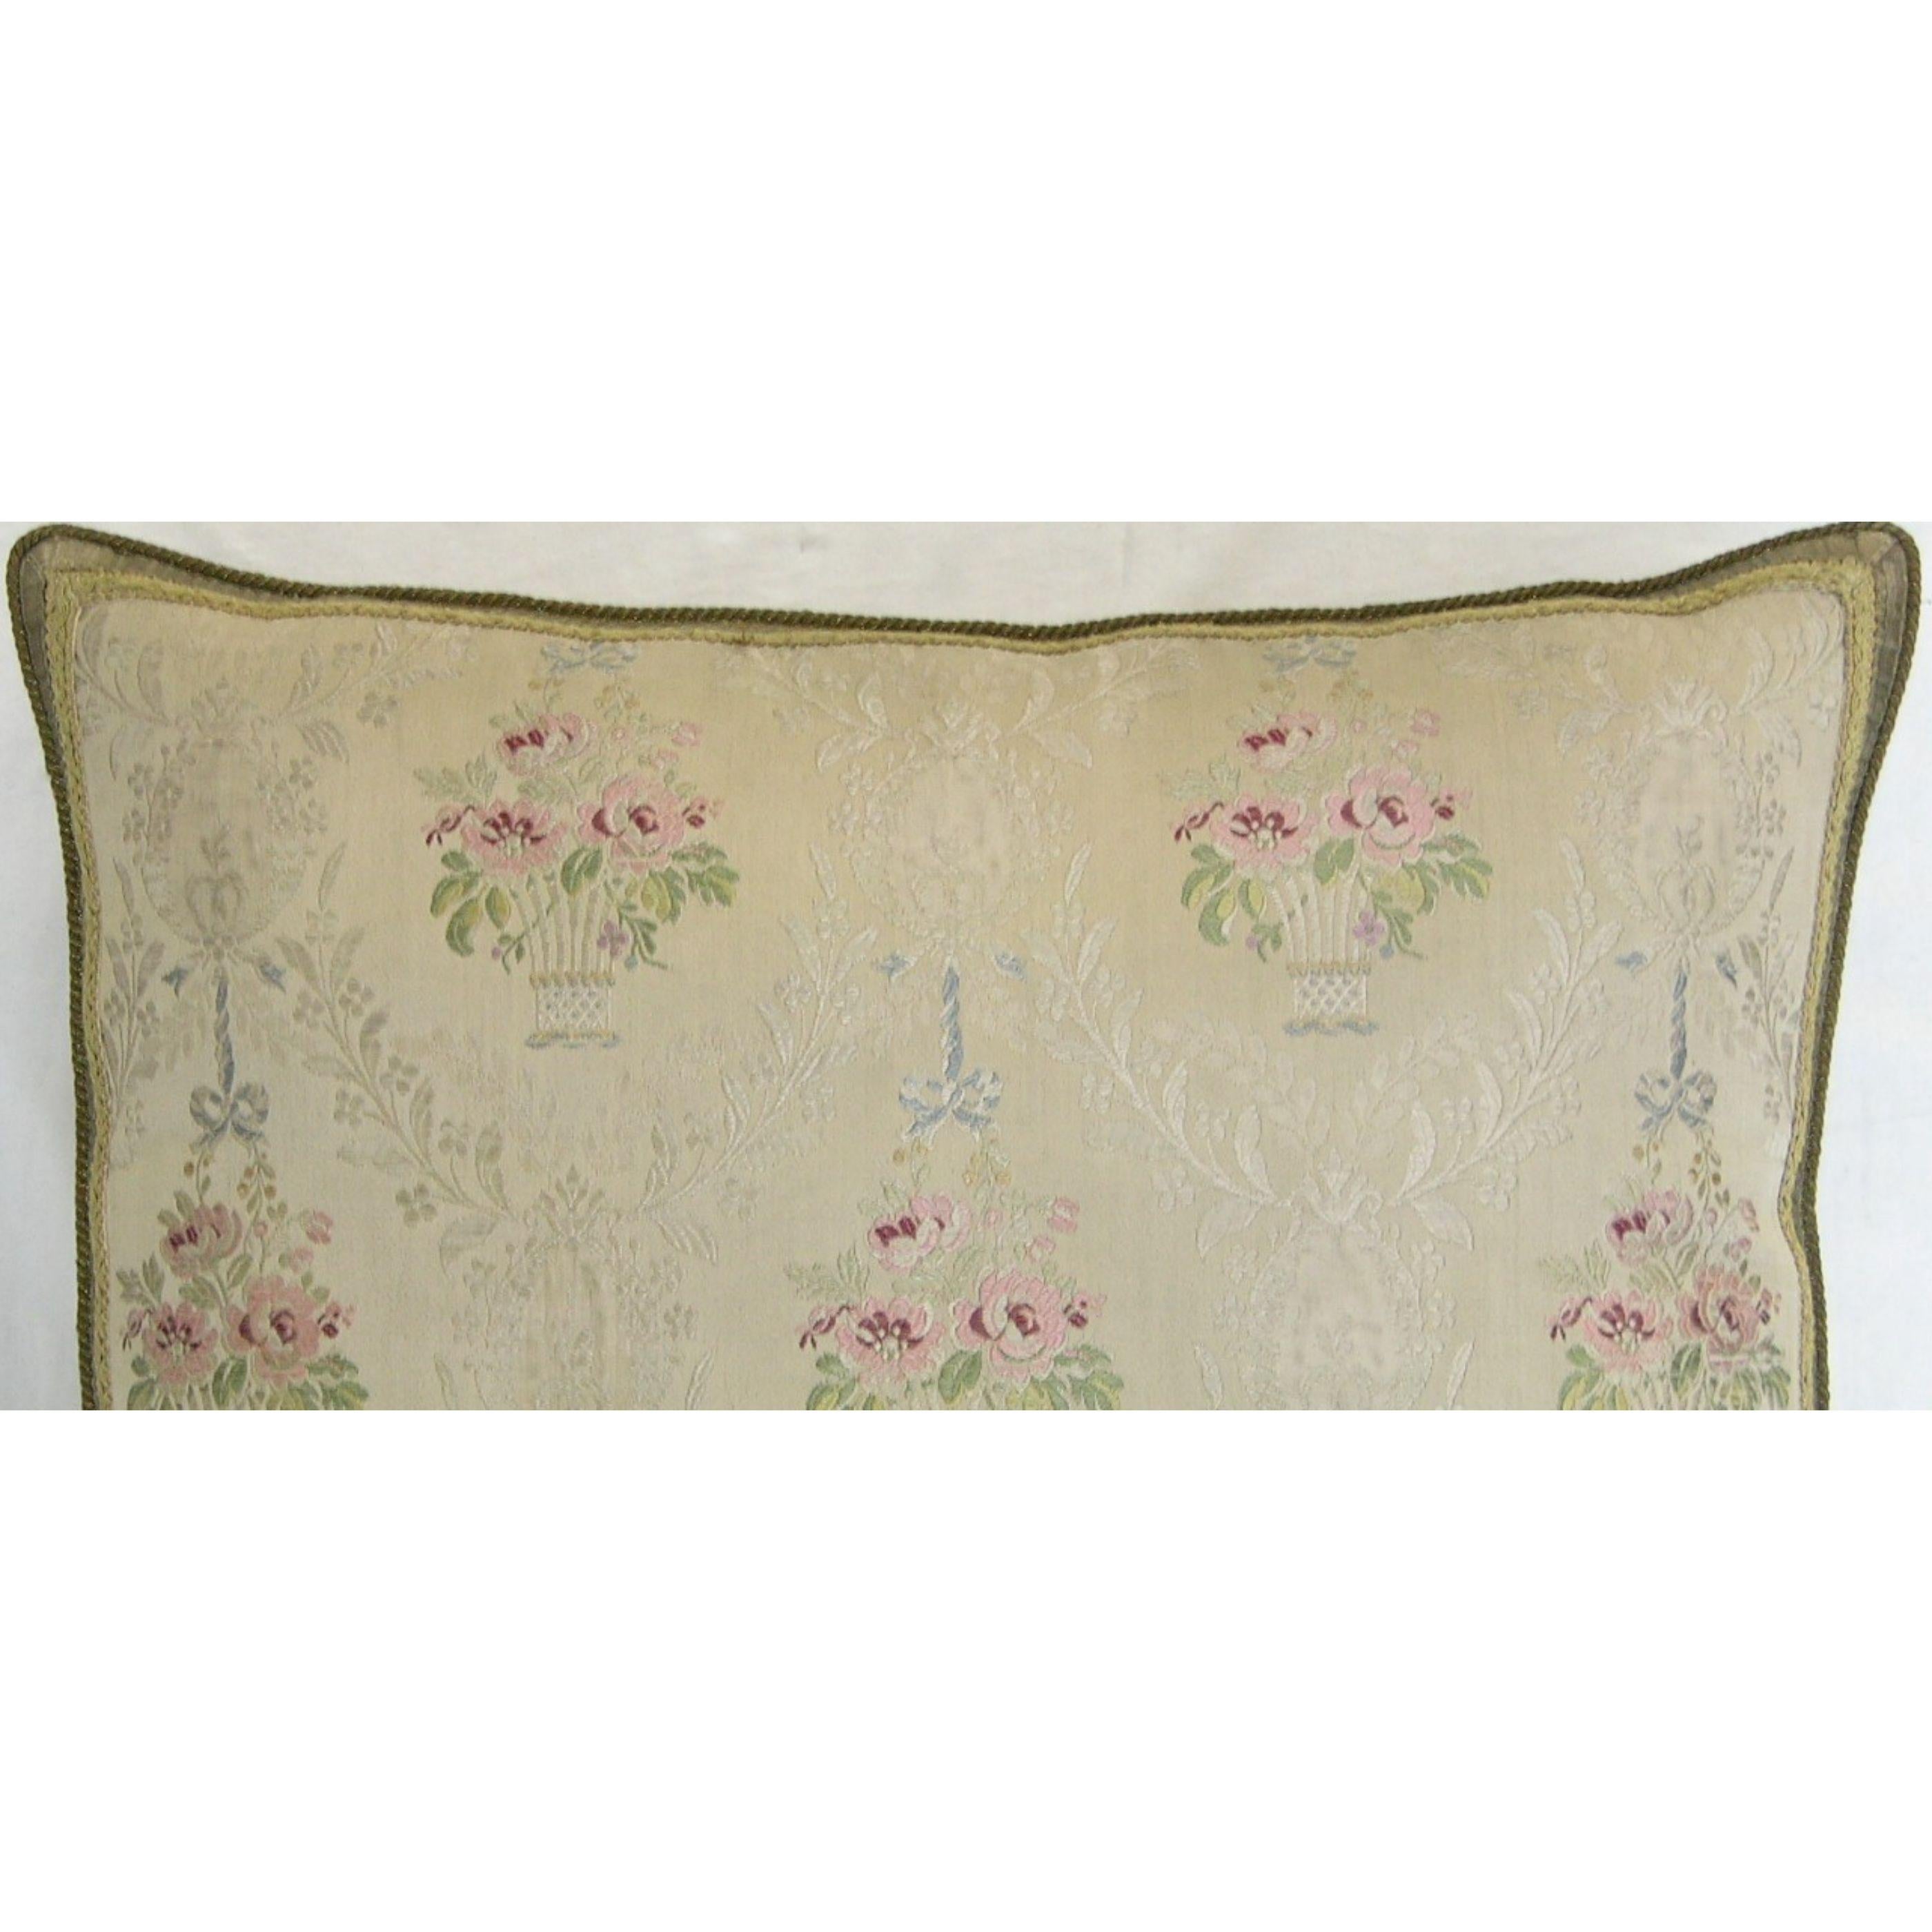 Circa 1860 Antique French Textile Pillow In Good Condition For Sale In Los Angeles, US